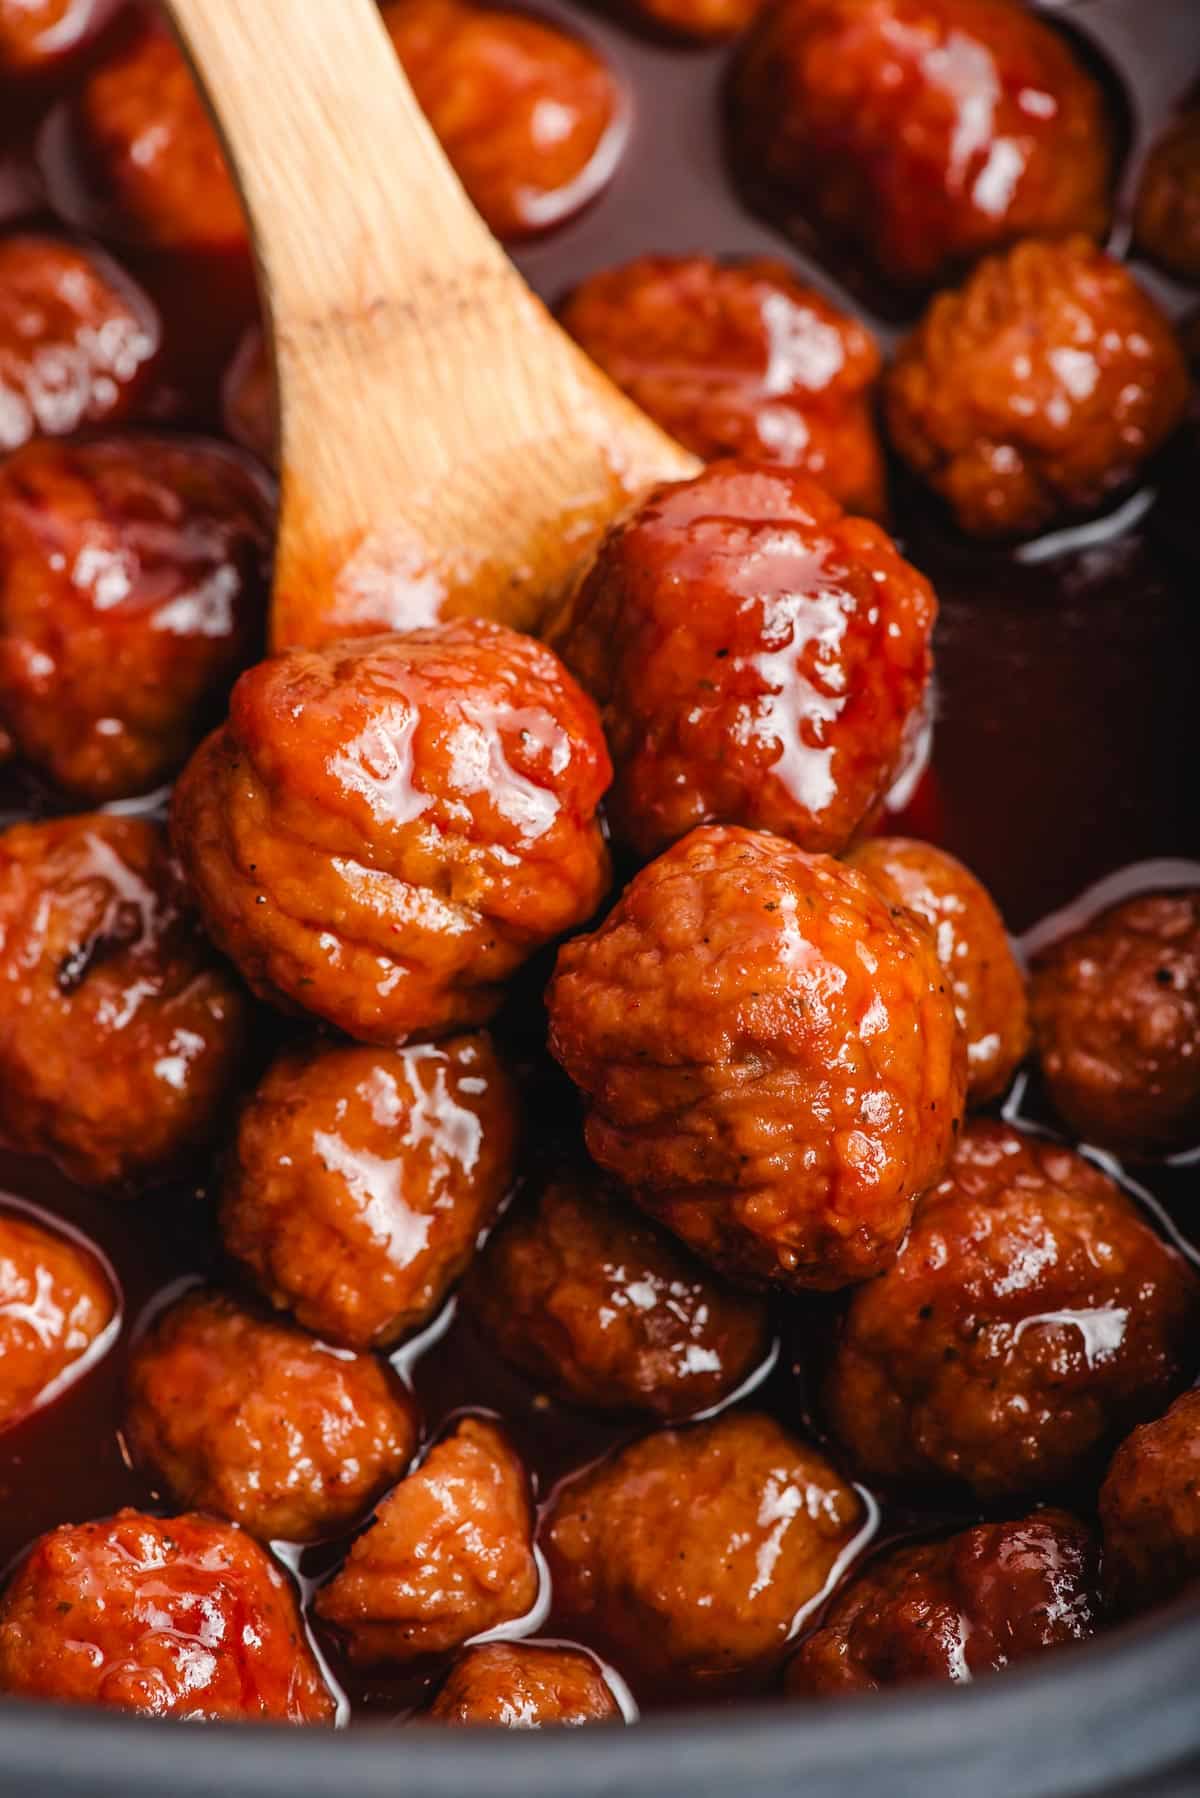 Wooden spoon scooping up grape jelly meatballs from a slow cooker.